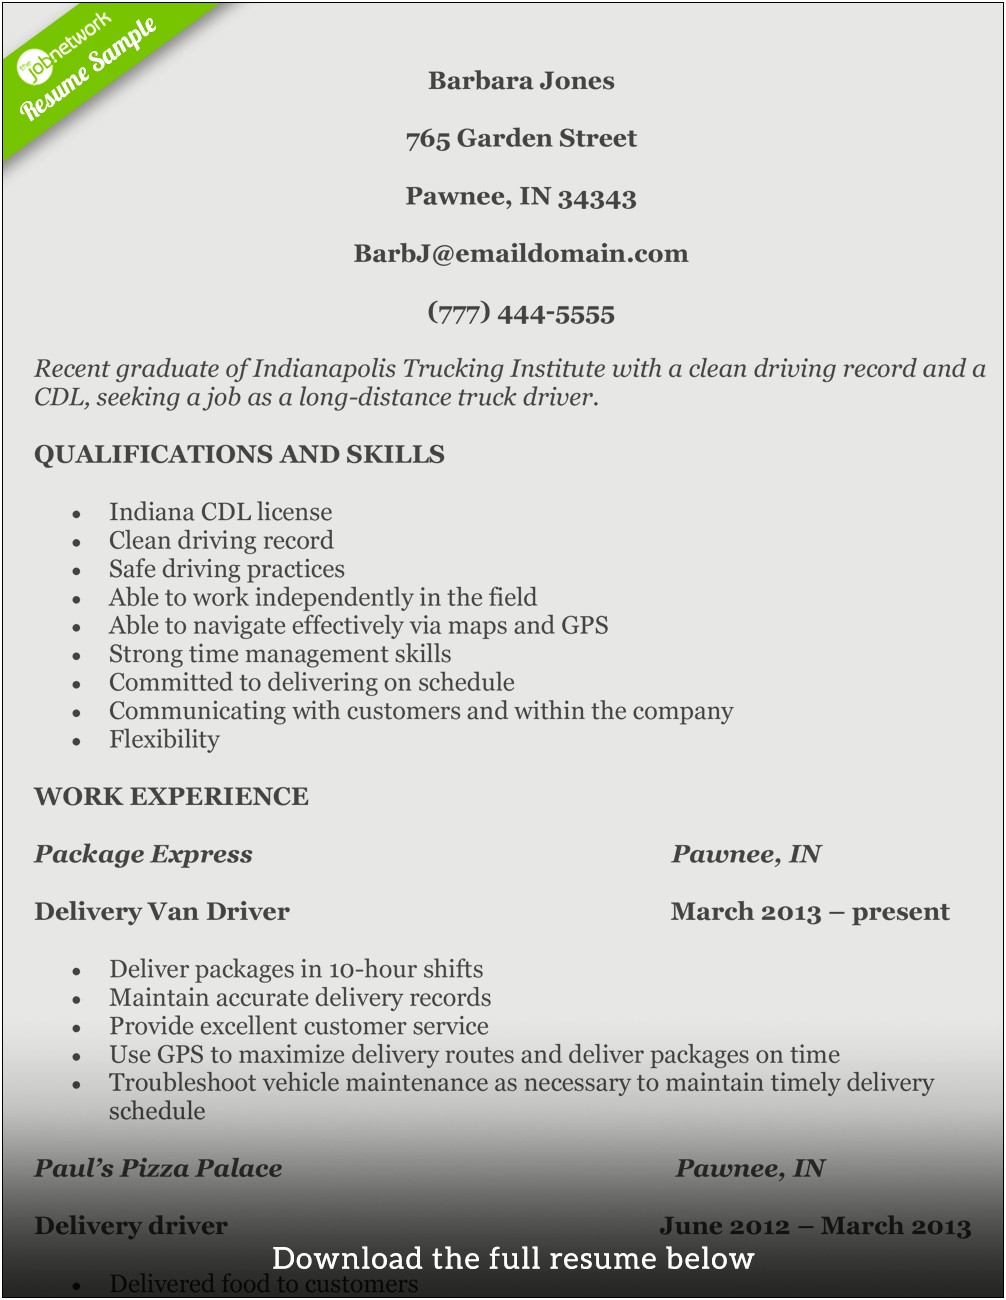 Functional Resume Strong Organizational Or Management Skills Examples